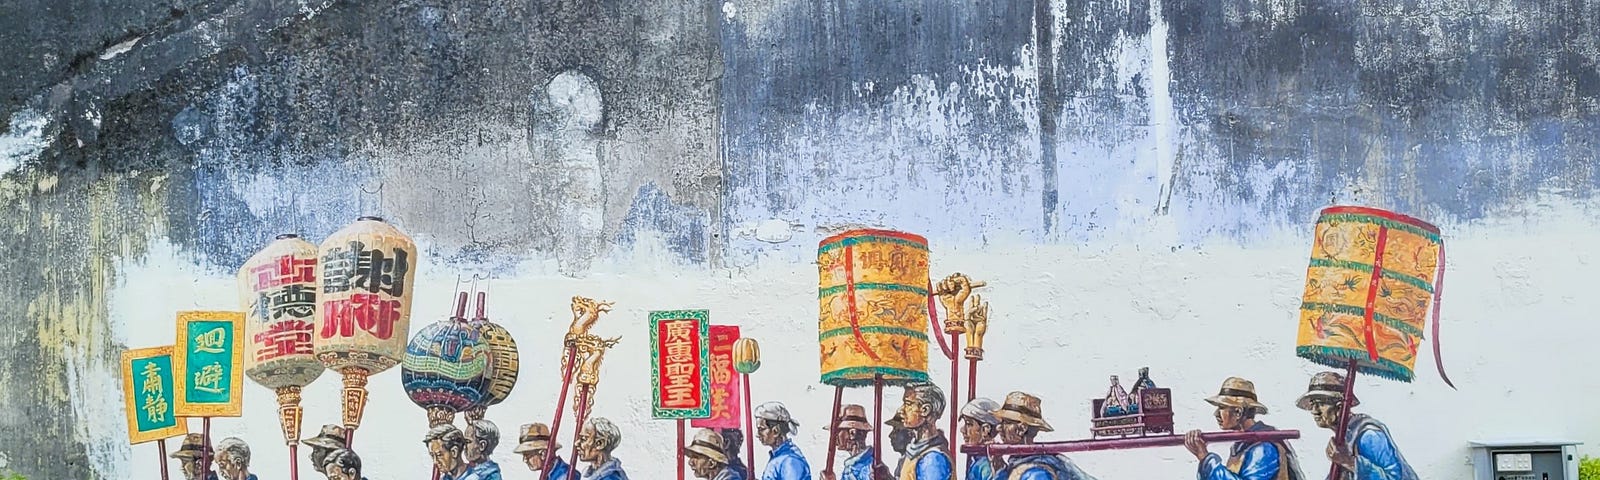 a mural on a building showing marching Chinese immigrants holding lanterns.